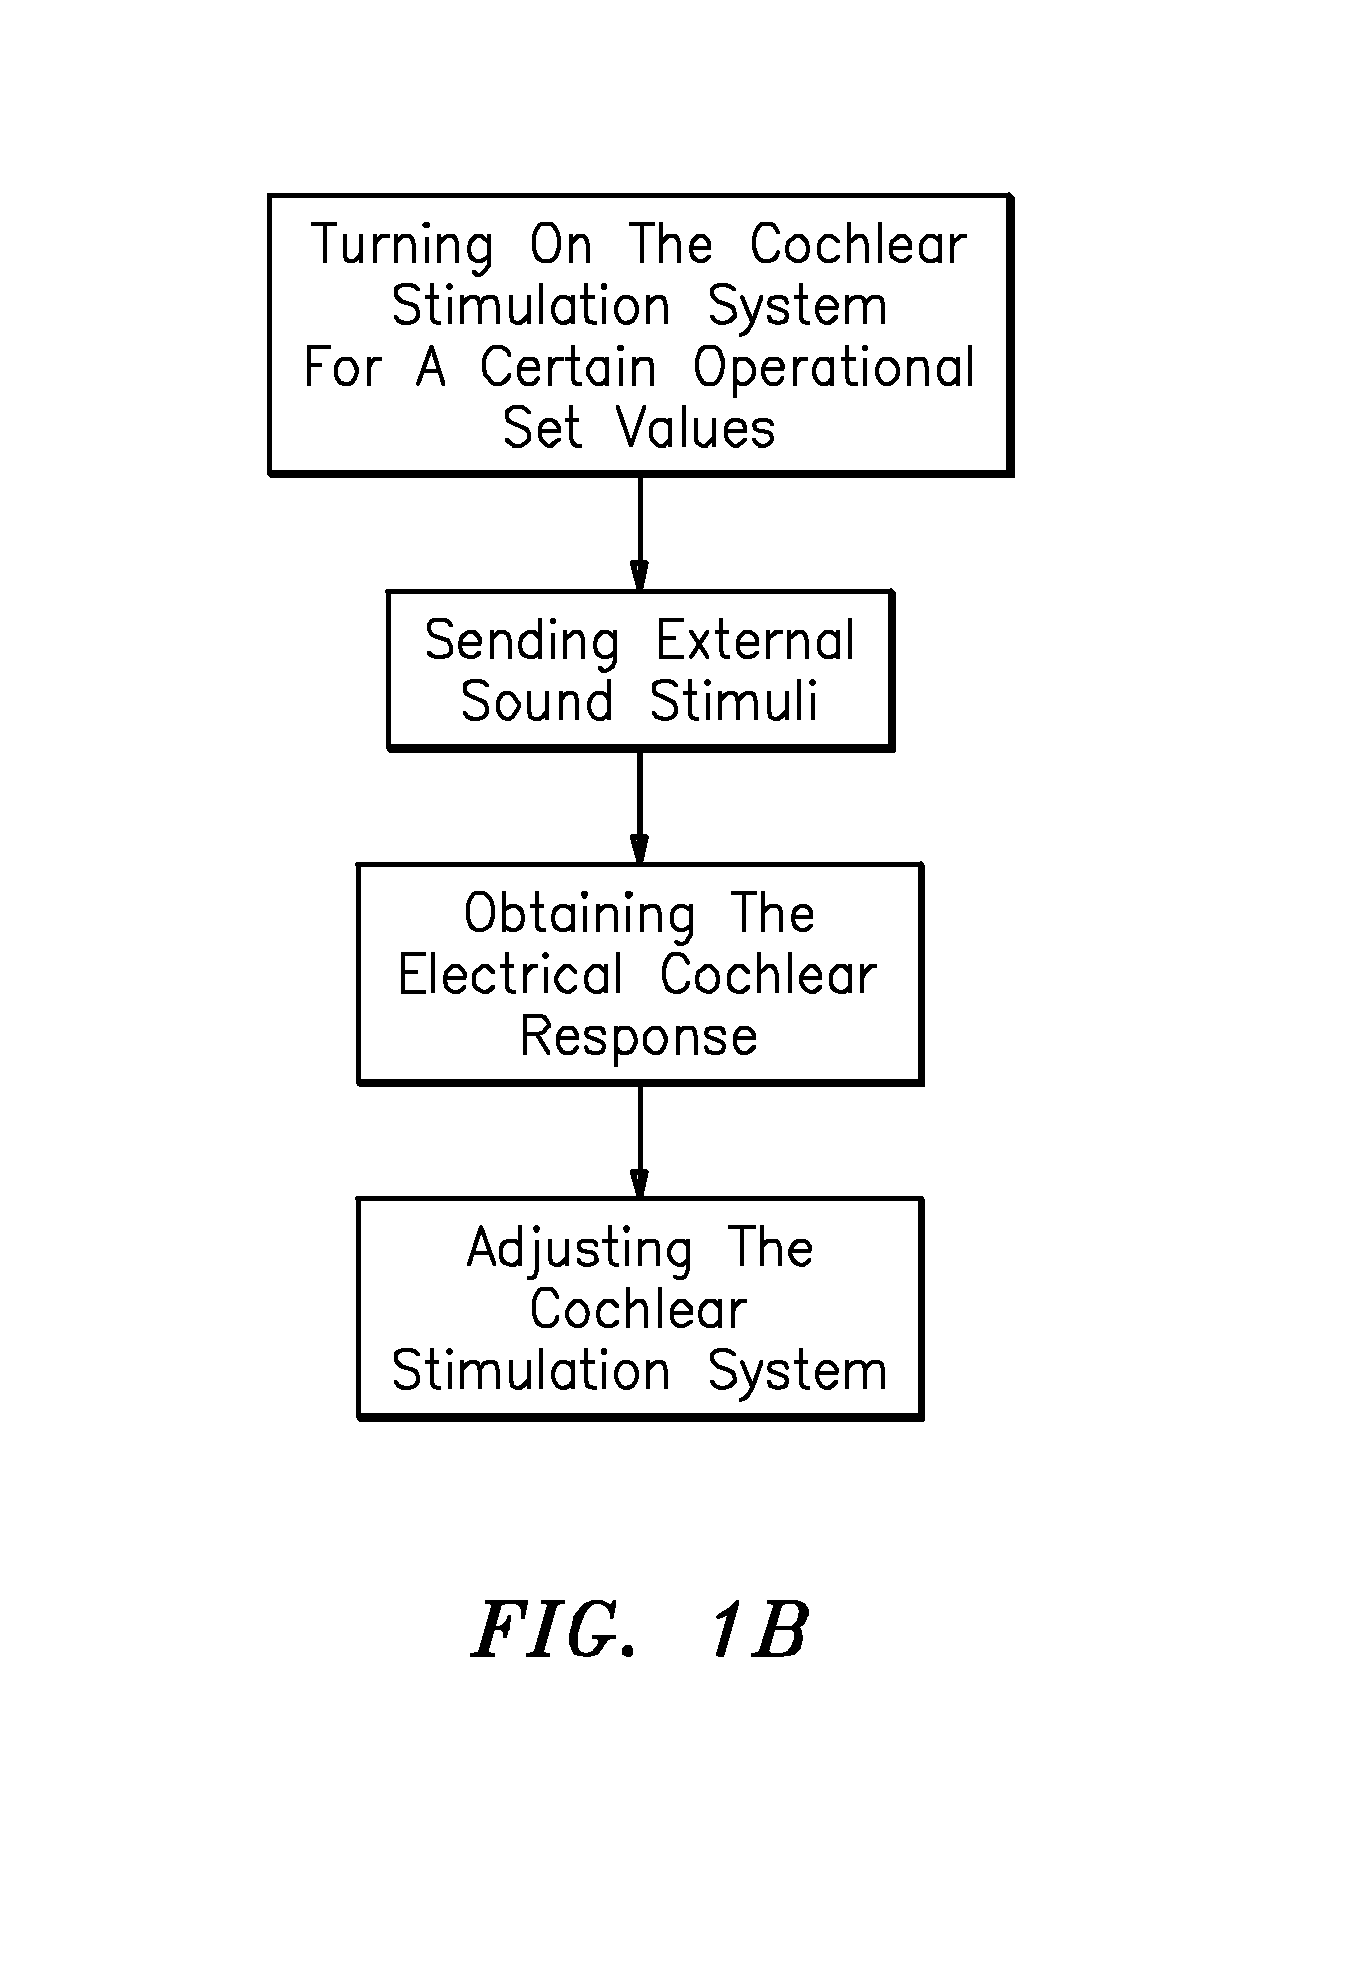 Method and apparatus for obtaining and registering an electrical cochlear response ("ecr")